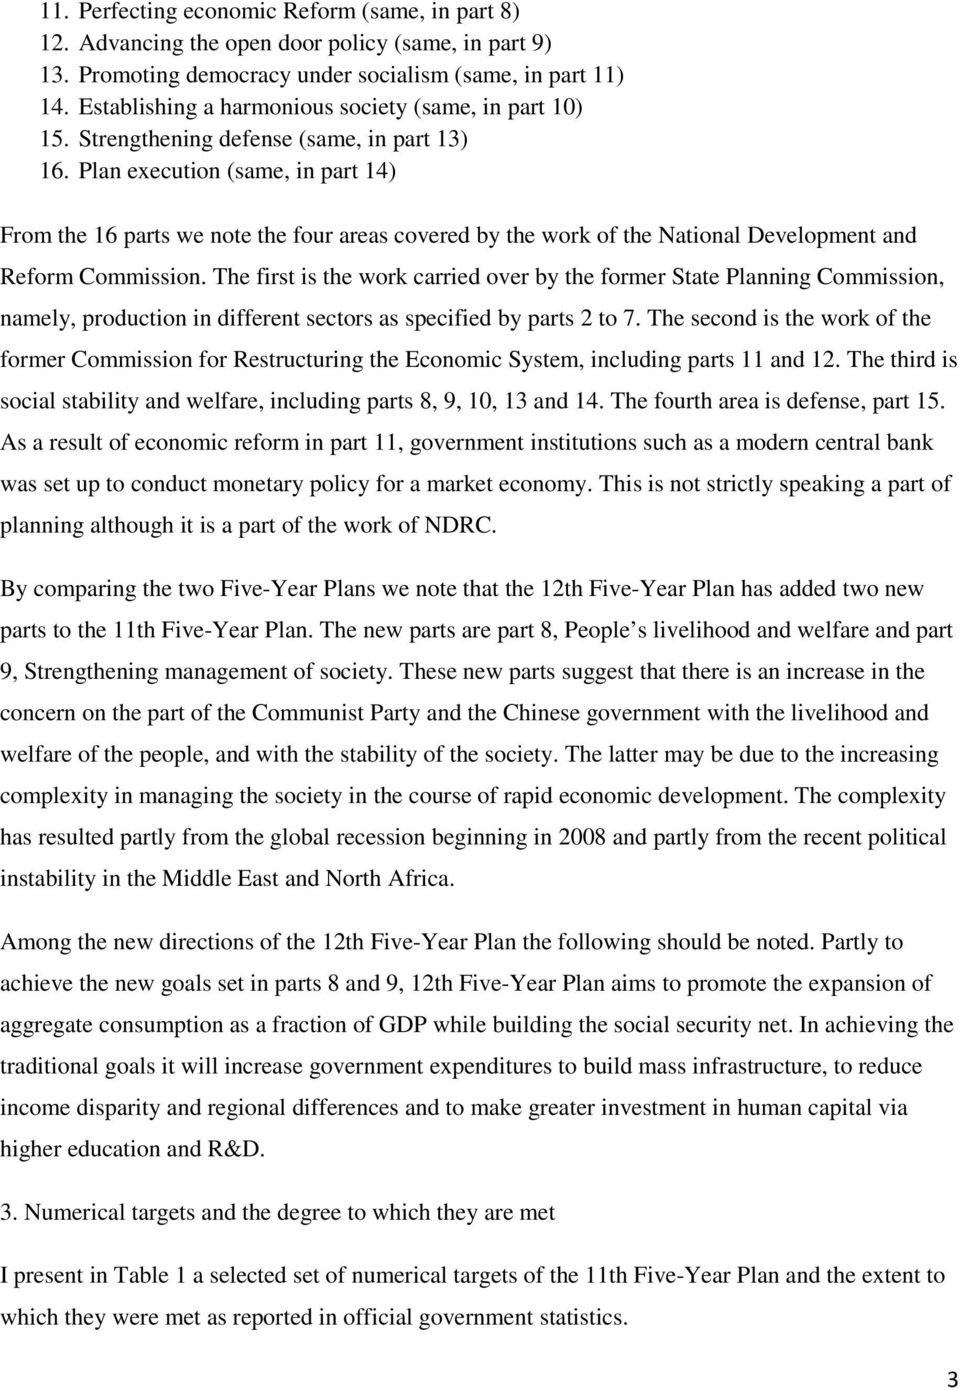 Plan execution (same, in part 14) From the 16 parts we note the four areas covered by the work of the National Development and Reform Commission.